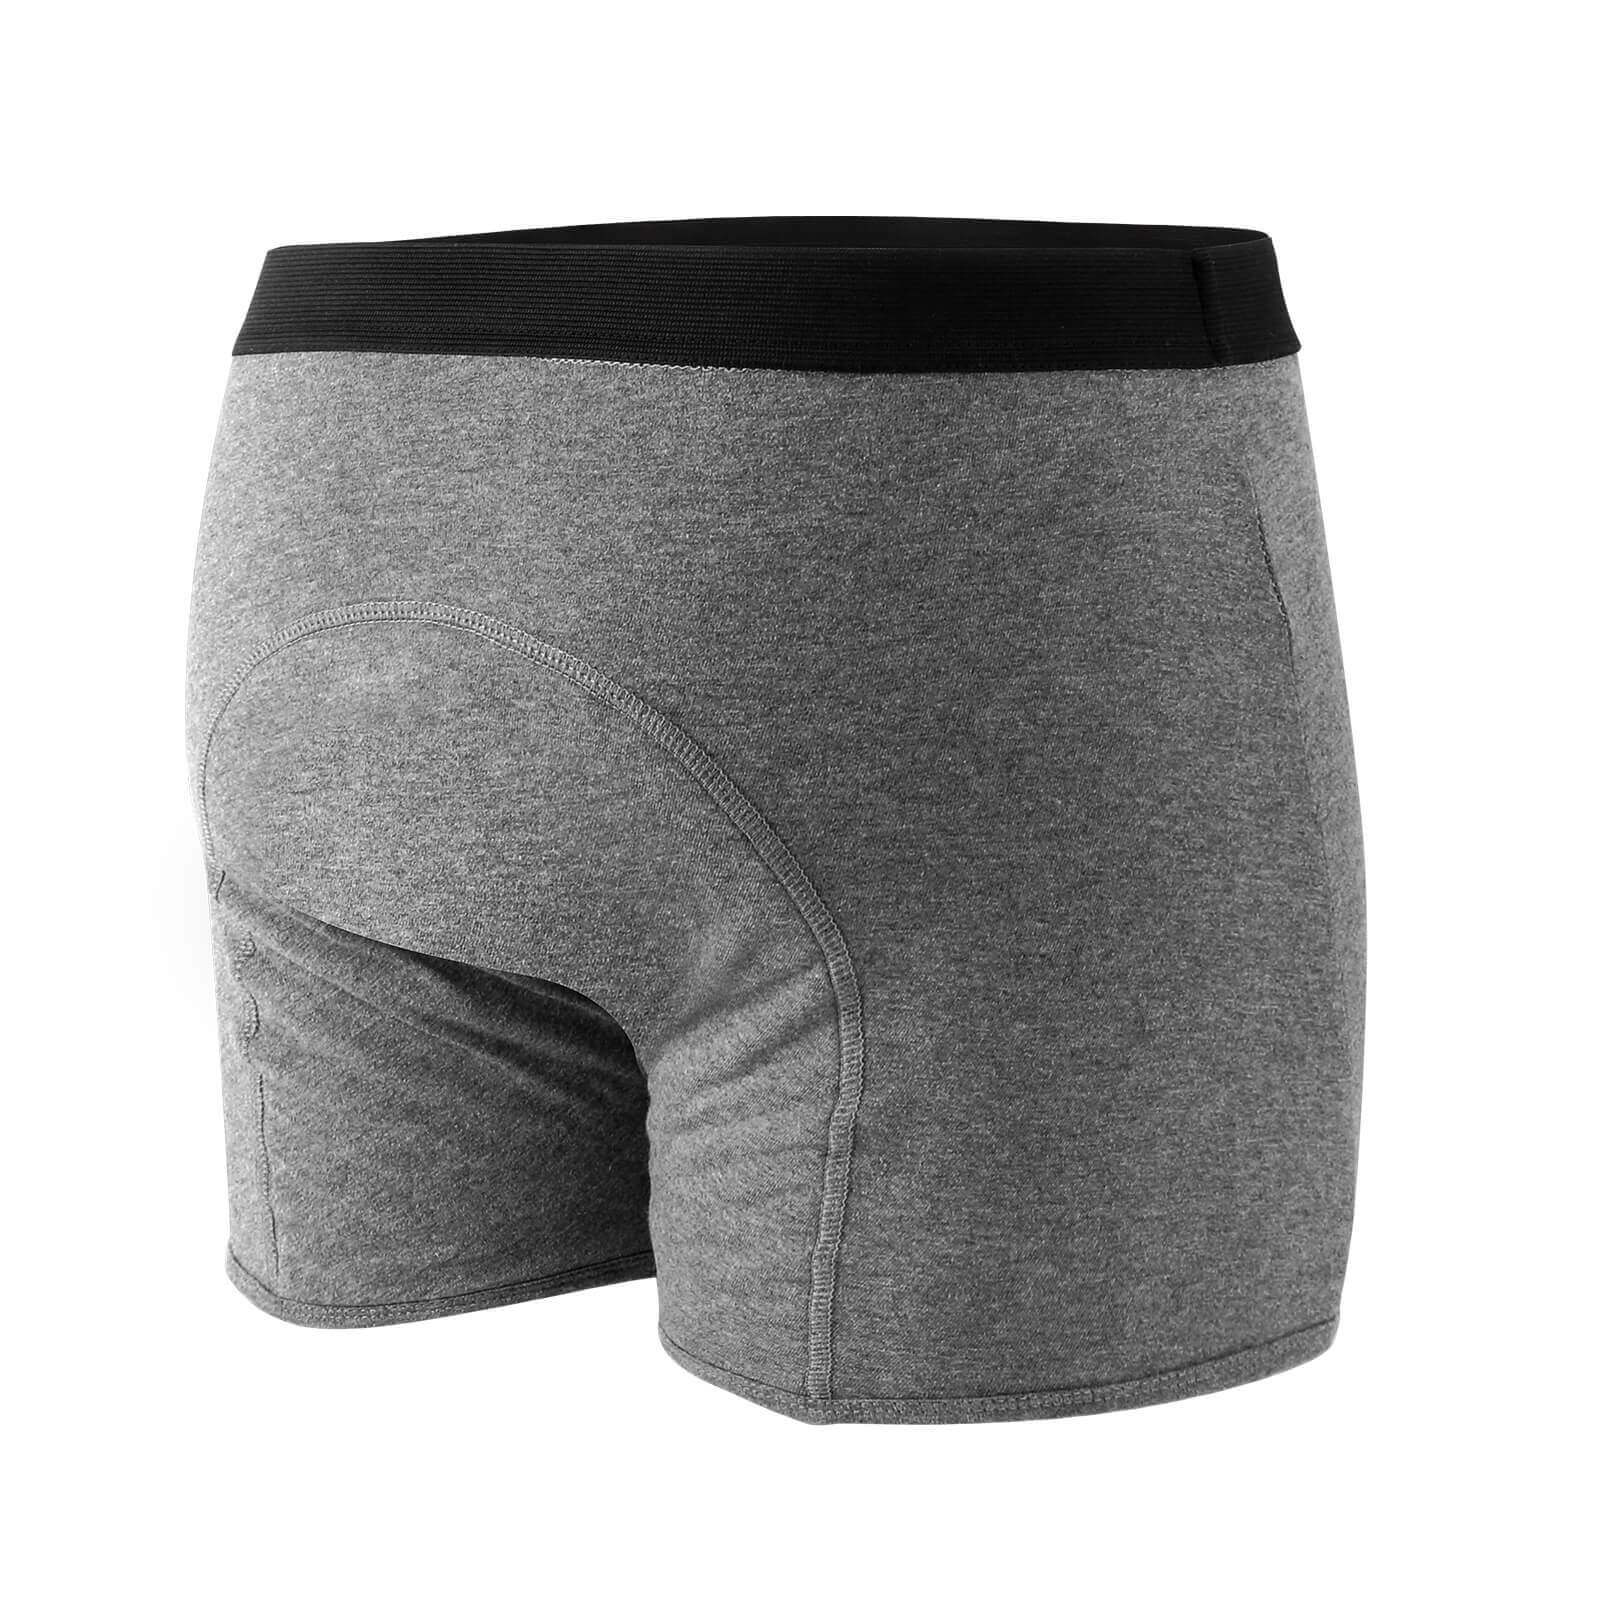 CARERSPK Men's Incontinence Underwear with Fly - M99